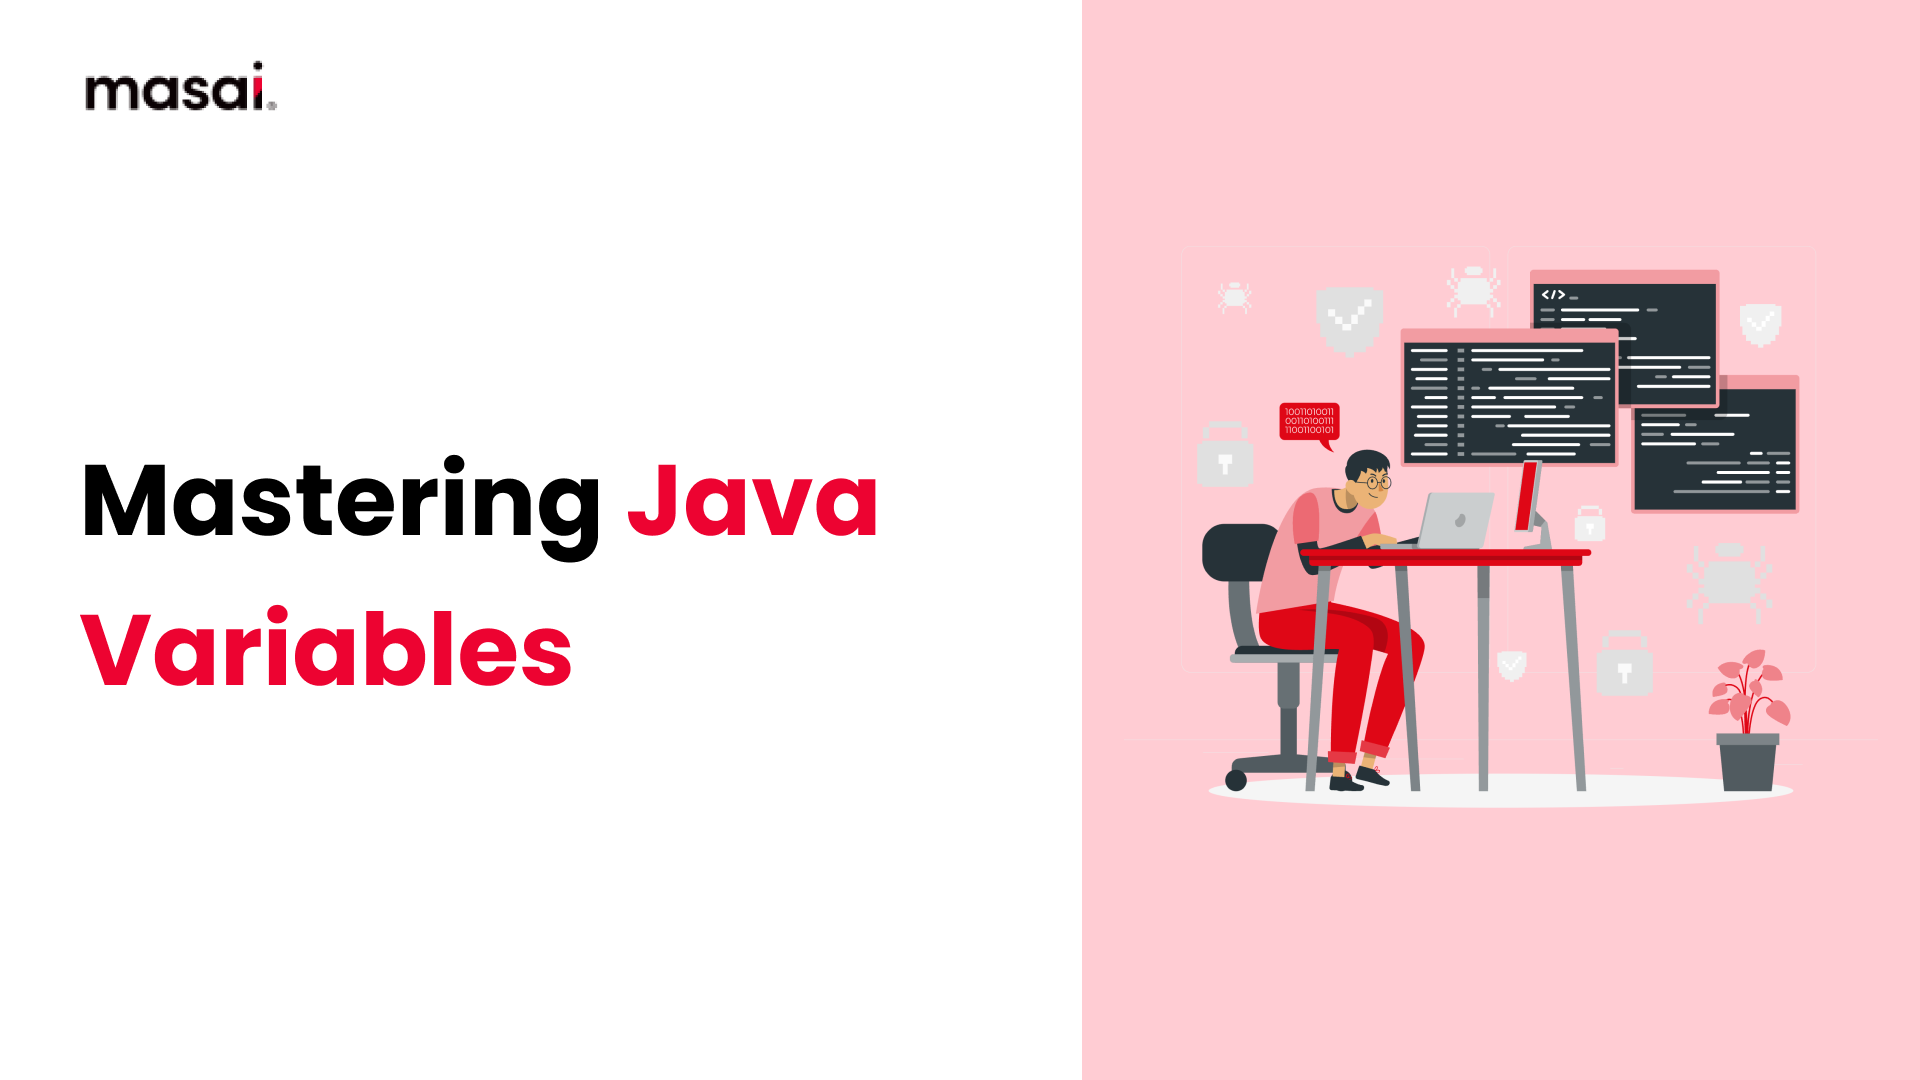 Mastering Java Variables: Declaration, Scope, and Usage